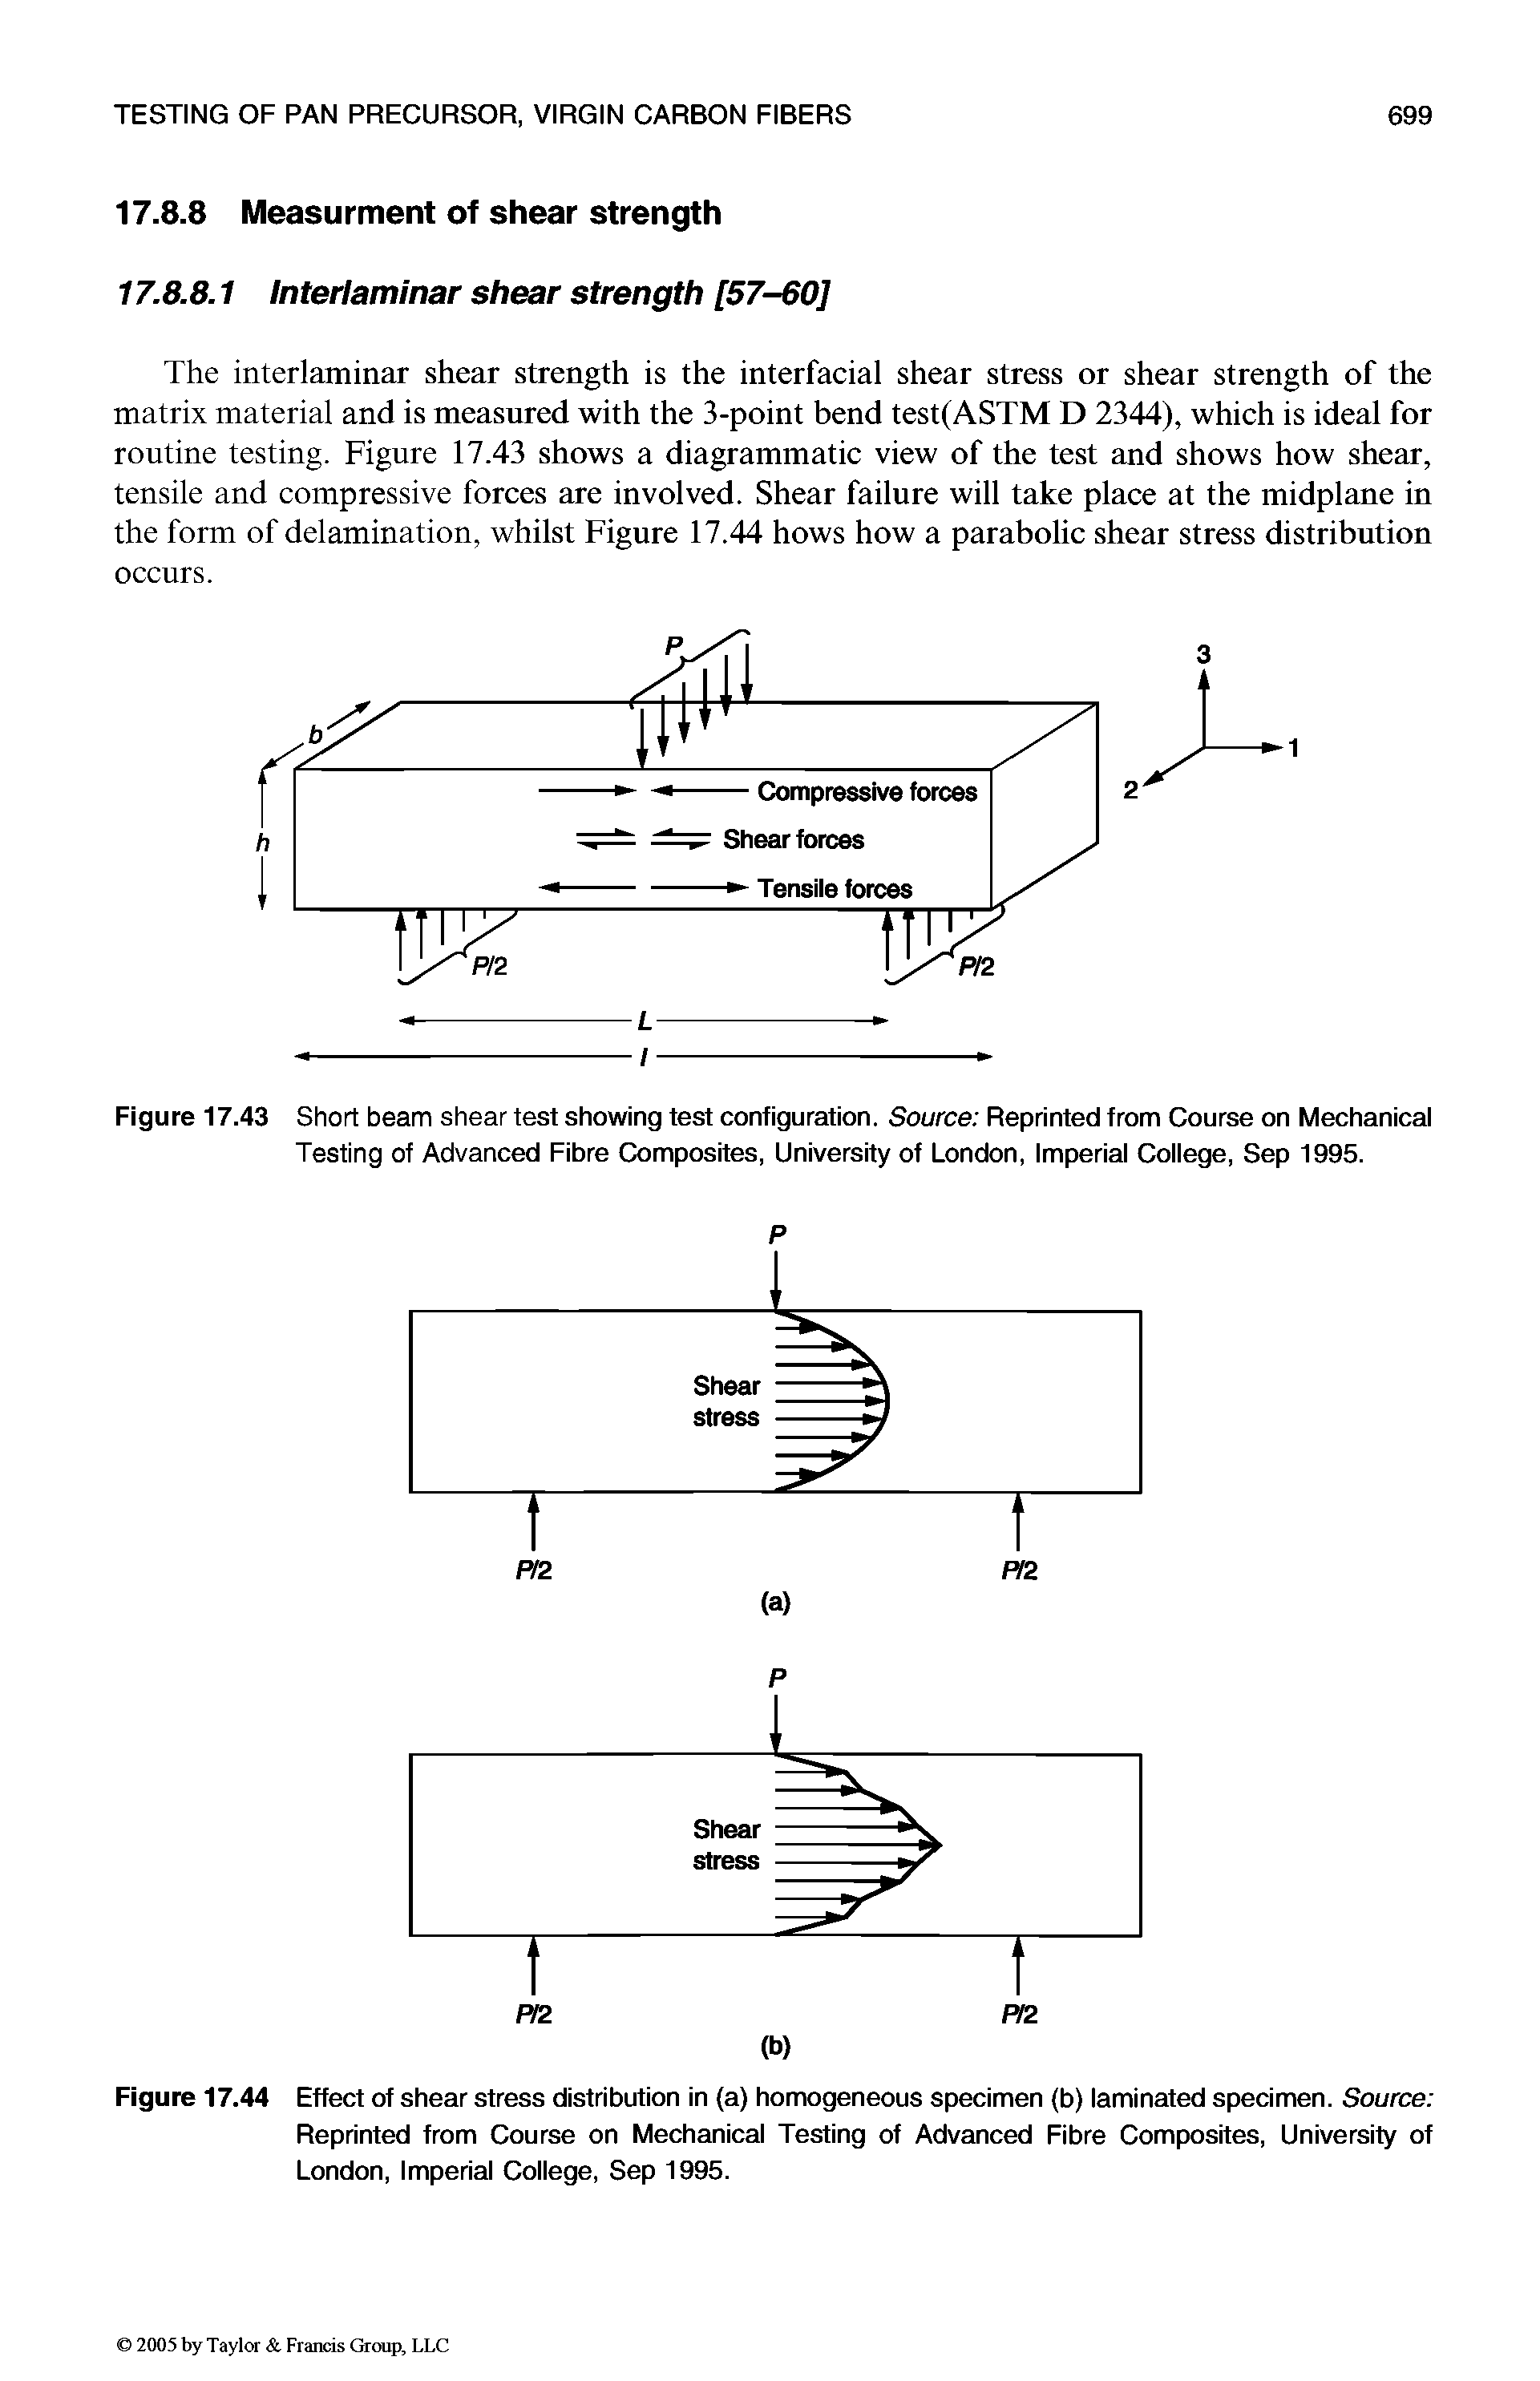 Figure 17.43 Short beam shear test showing test configuration. Source Reprinted from Course on Mechanicai Testing of Advanced Fibre Composites, University of London, imperiai Coiiege, Sep 1995.